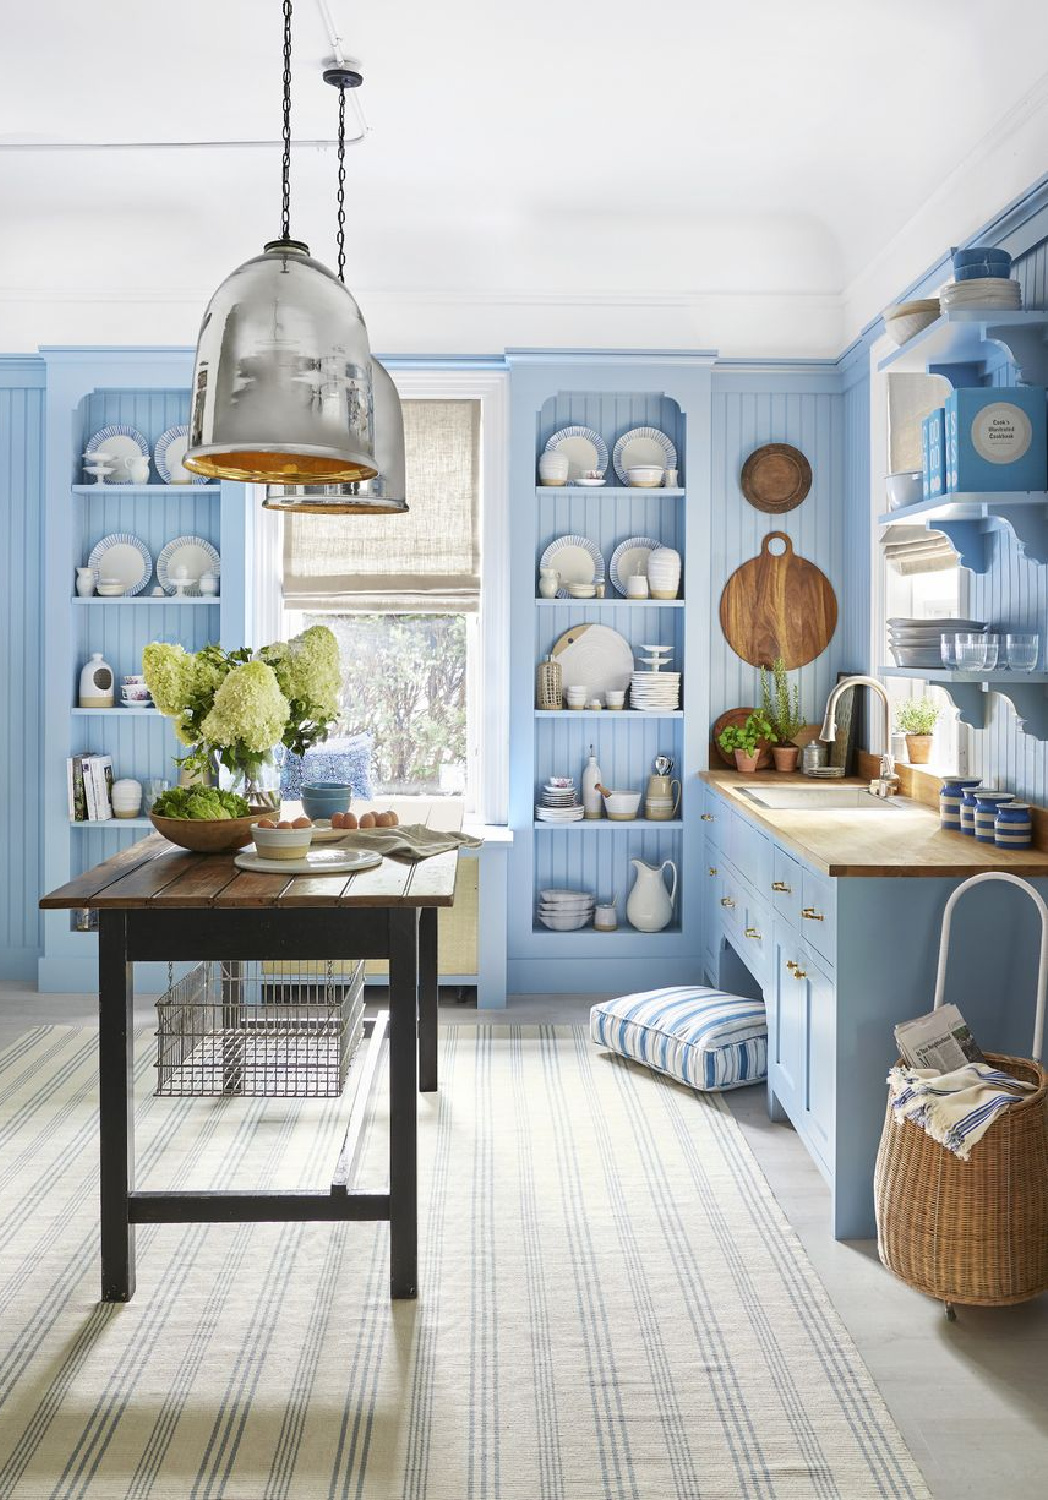 Beautiful blue country kitchen by Sarah Blank (Alec Hemer photo) painted Lulworth Blue by Farrow & Ball. #countrykitchens #bluekitchen